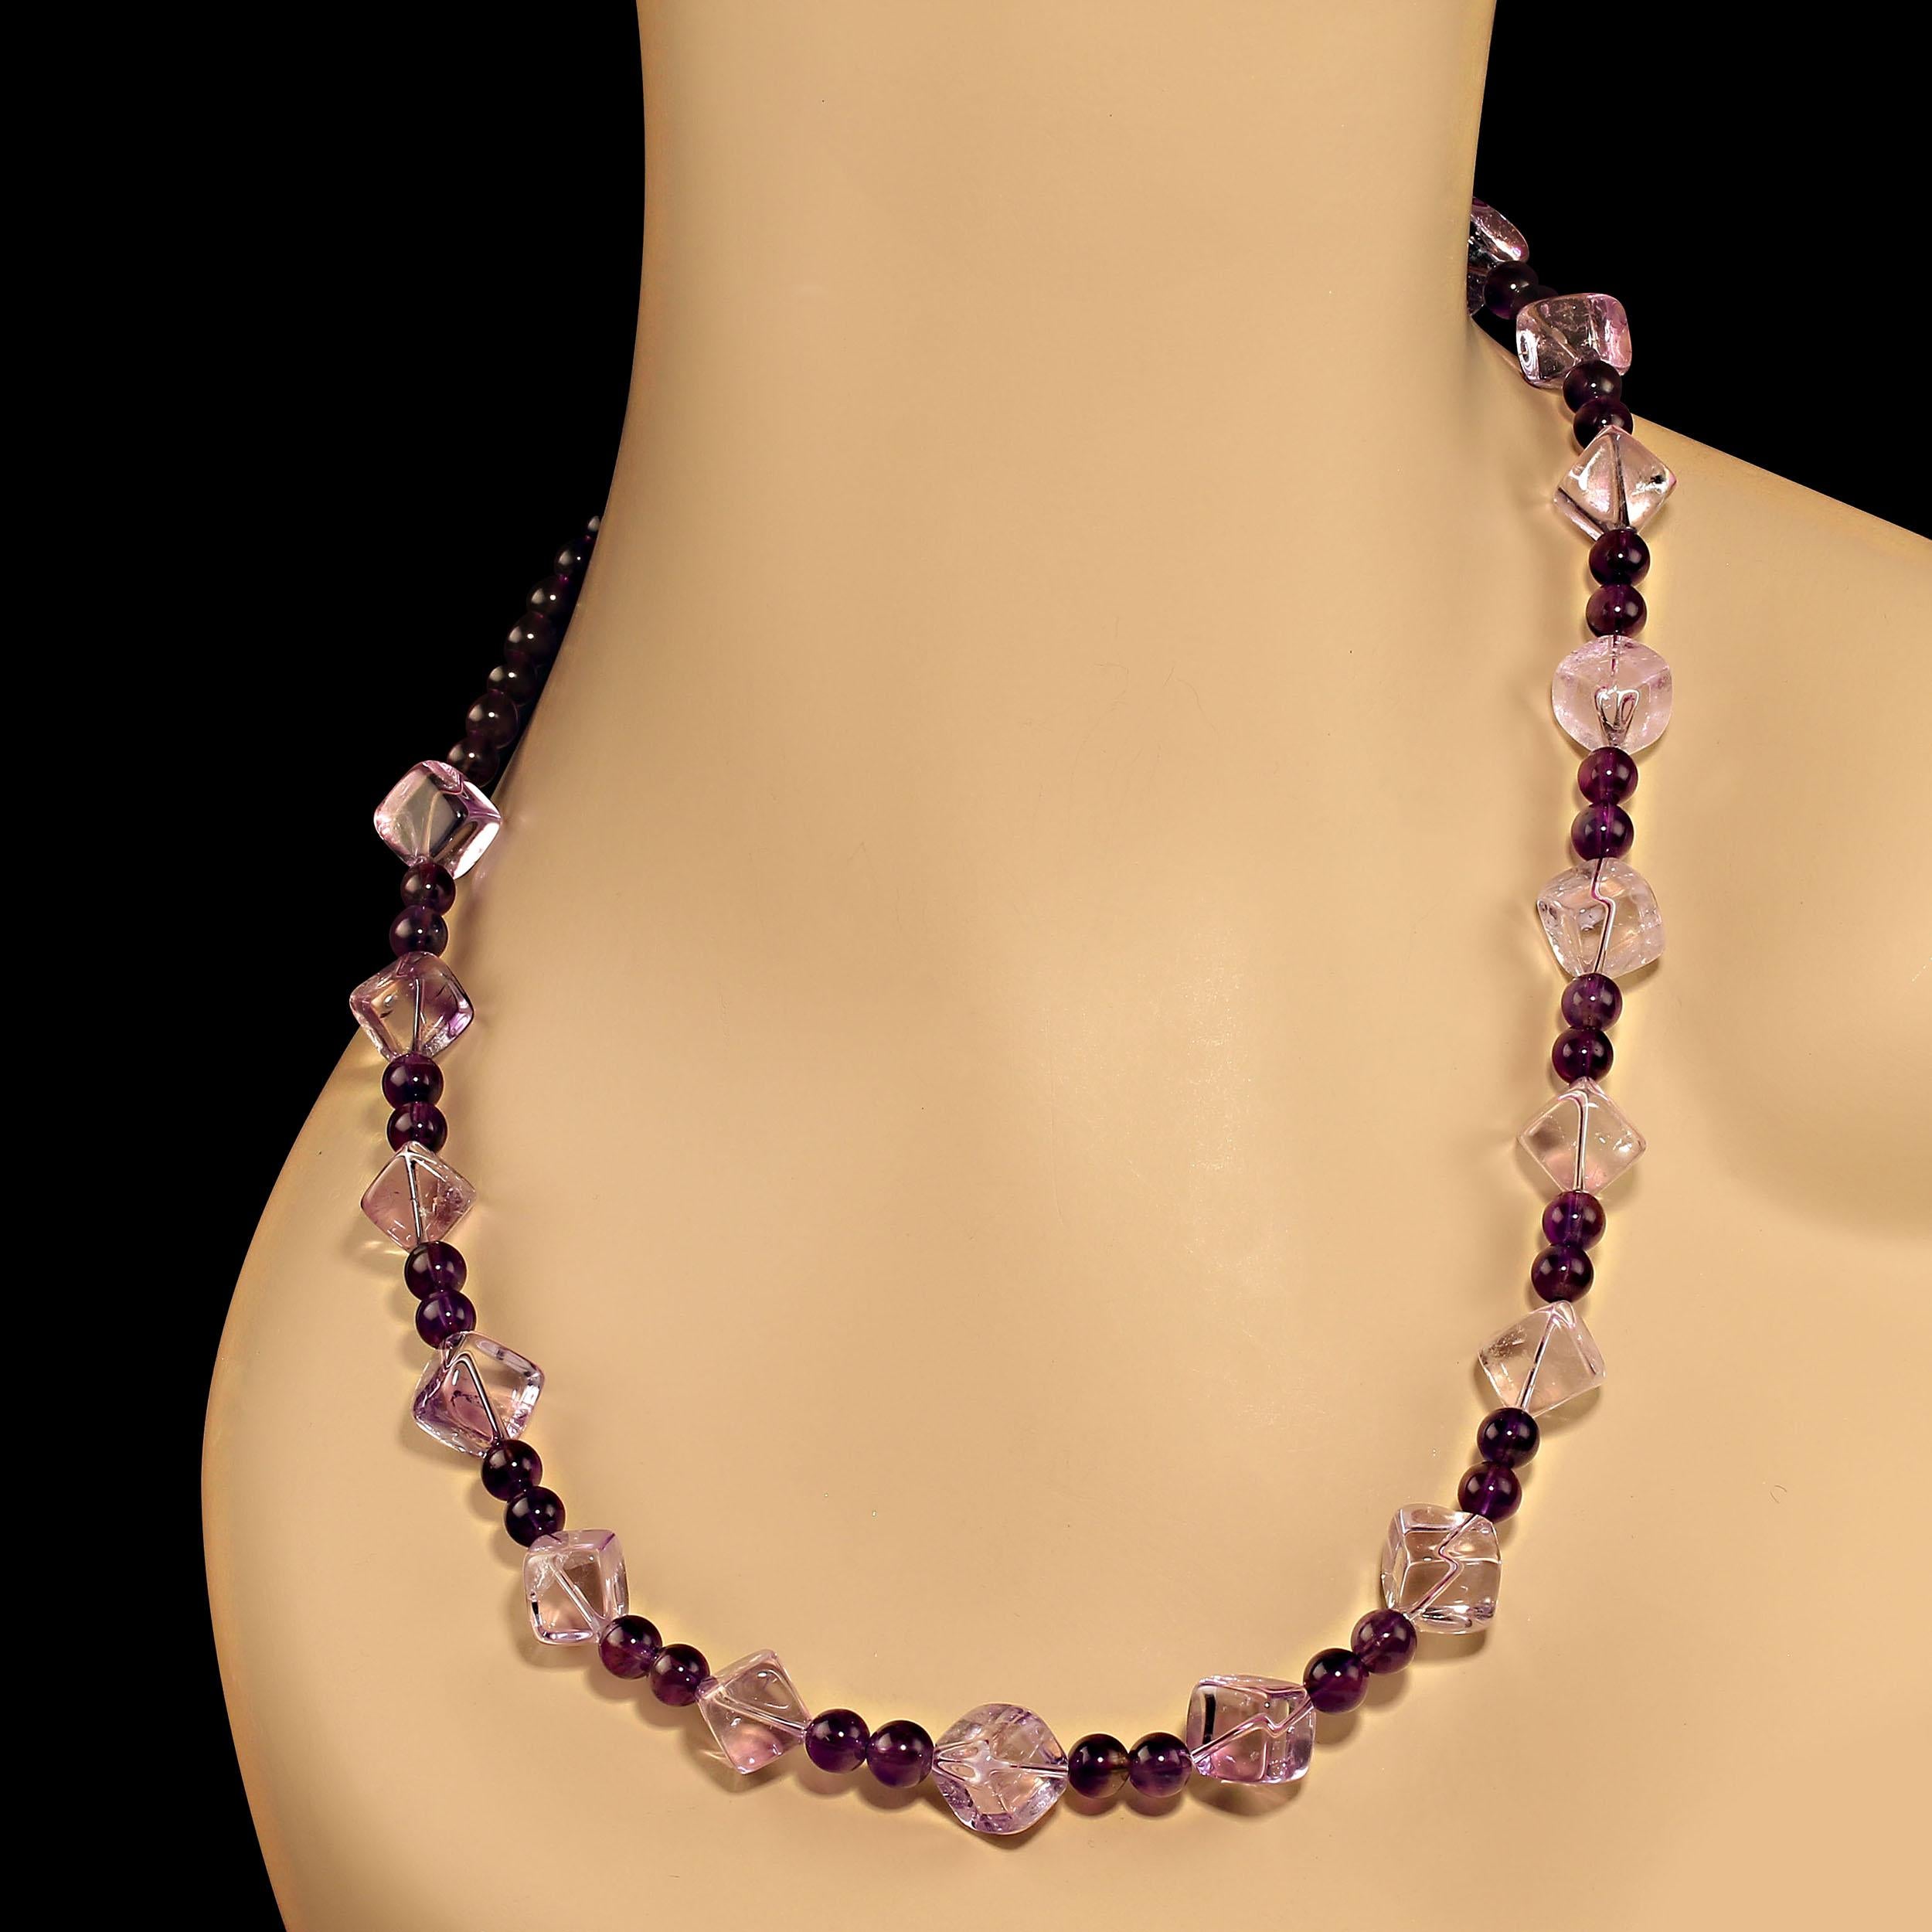 Artisan AJD Rose of France Cubes and 6MM Amethyst in a 21 Inch Necklace For Sale